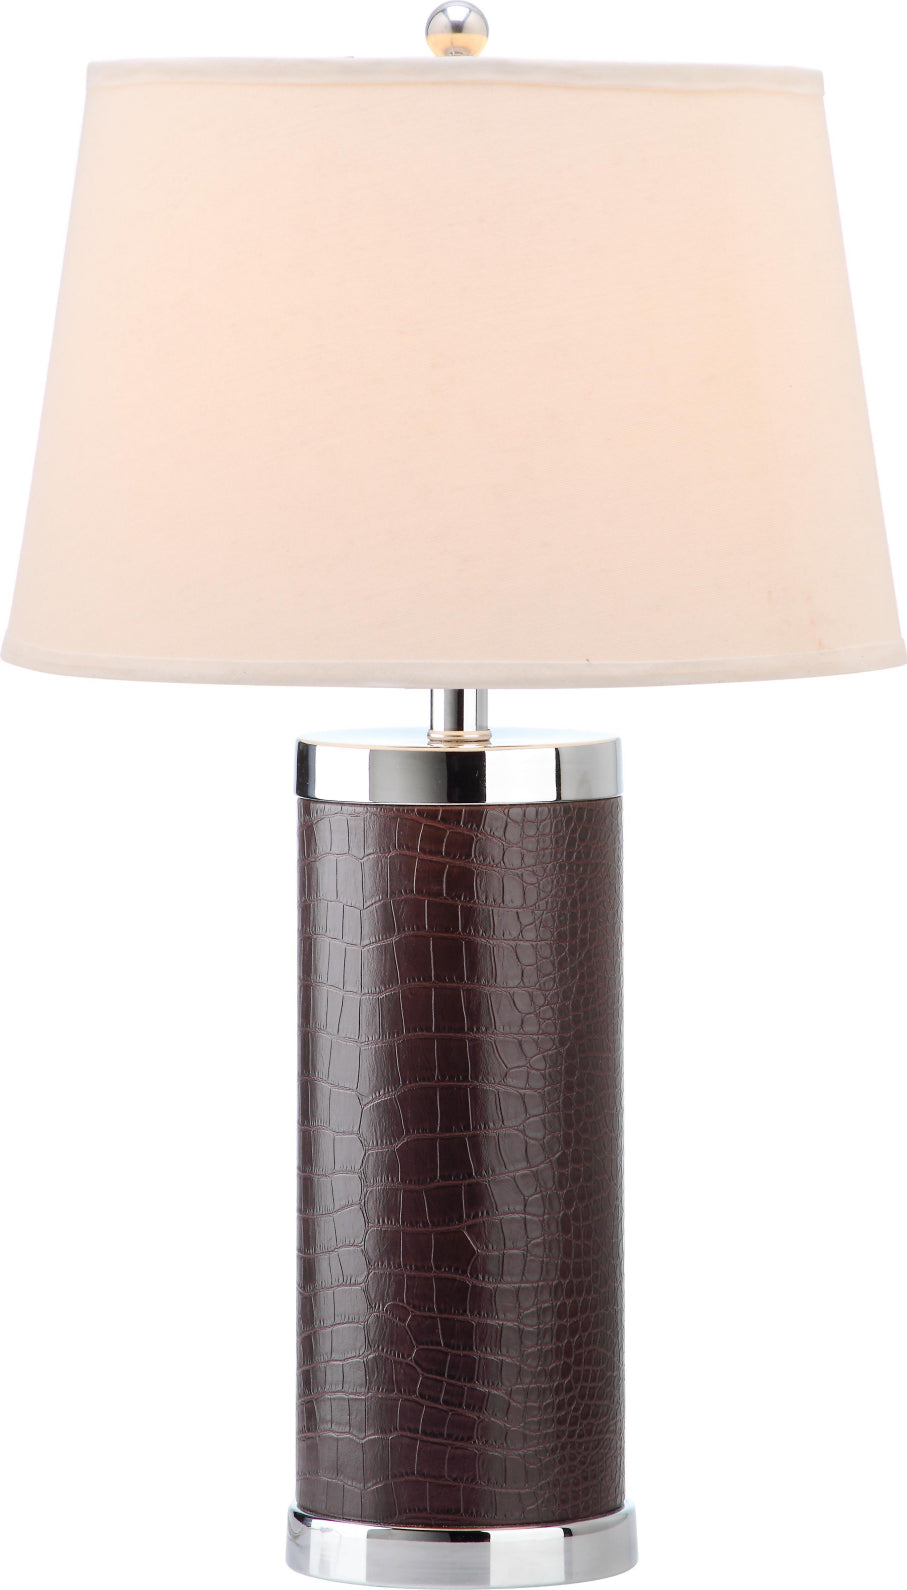 Safavieh Leather 25-Inch H Column Table Lamp Brown Mirror main image